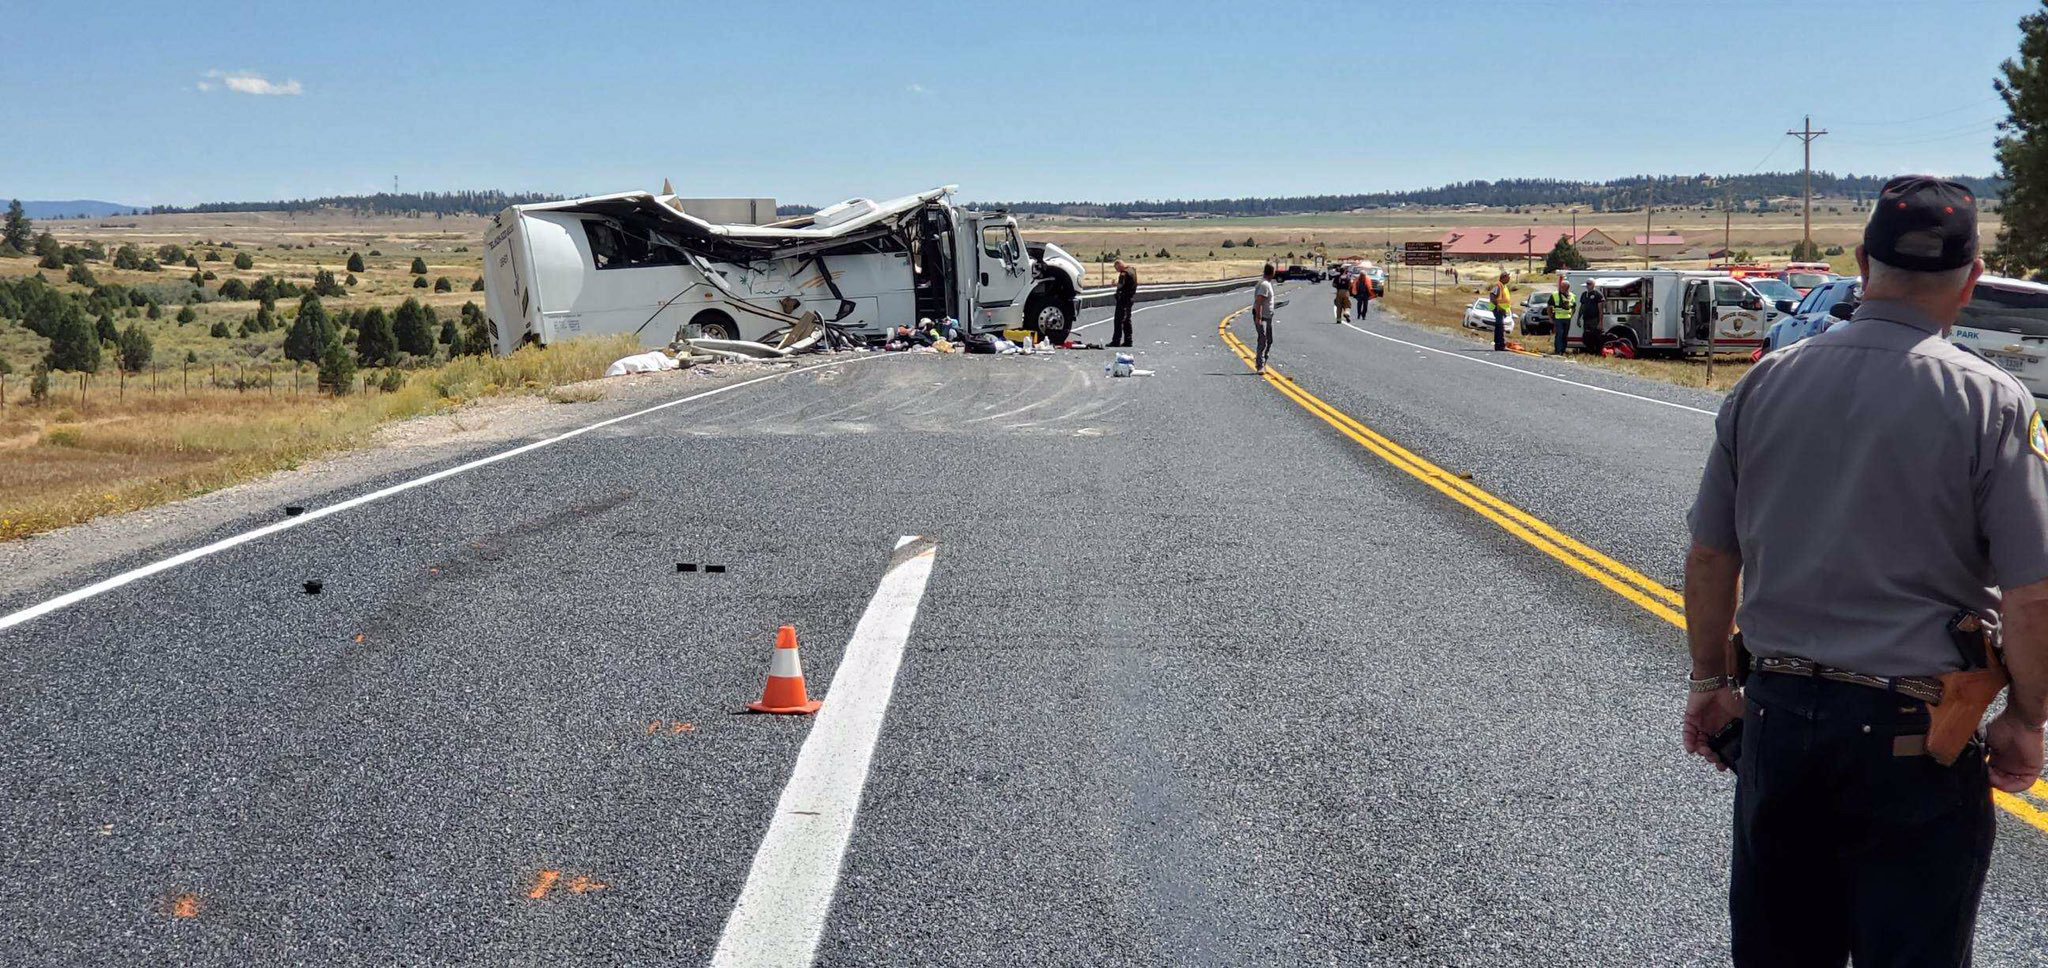 PHOTO: People work at the scene where a tour bus crashed near Bryce Canyon National Park on SR-12 in Utah, Sept. 20, 2019.